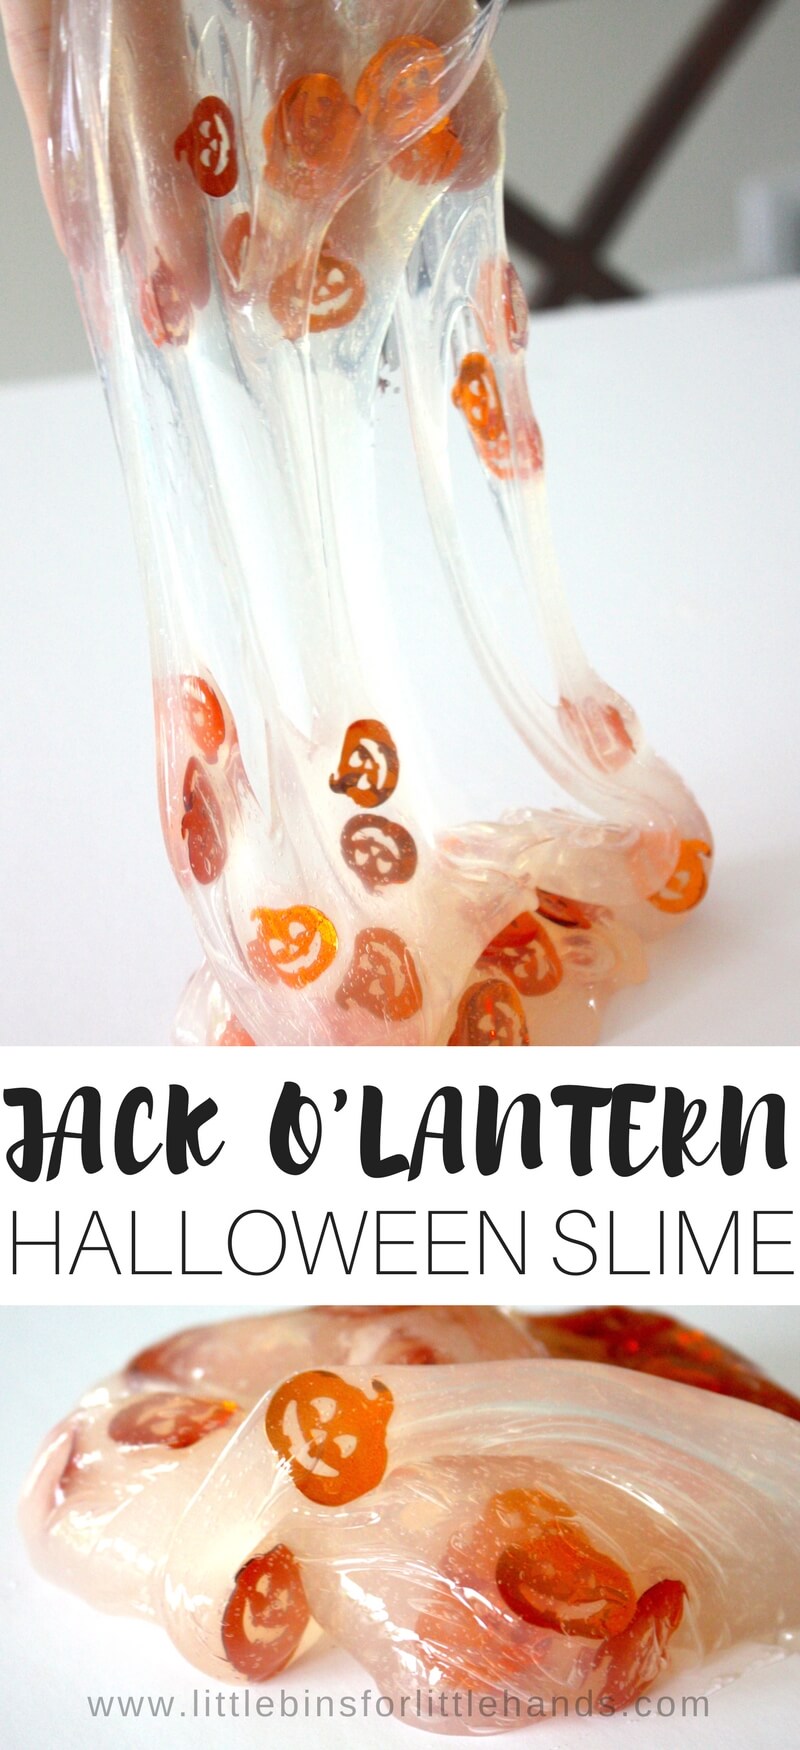 Our homemade Jack O Lantern slime recipe is the perfect Halloween slime for kids. We have more fun Halloween slime ideas including vampire slime, monster slime, pumpkin slime, and more!